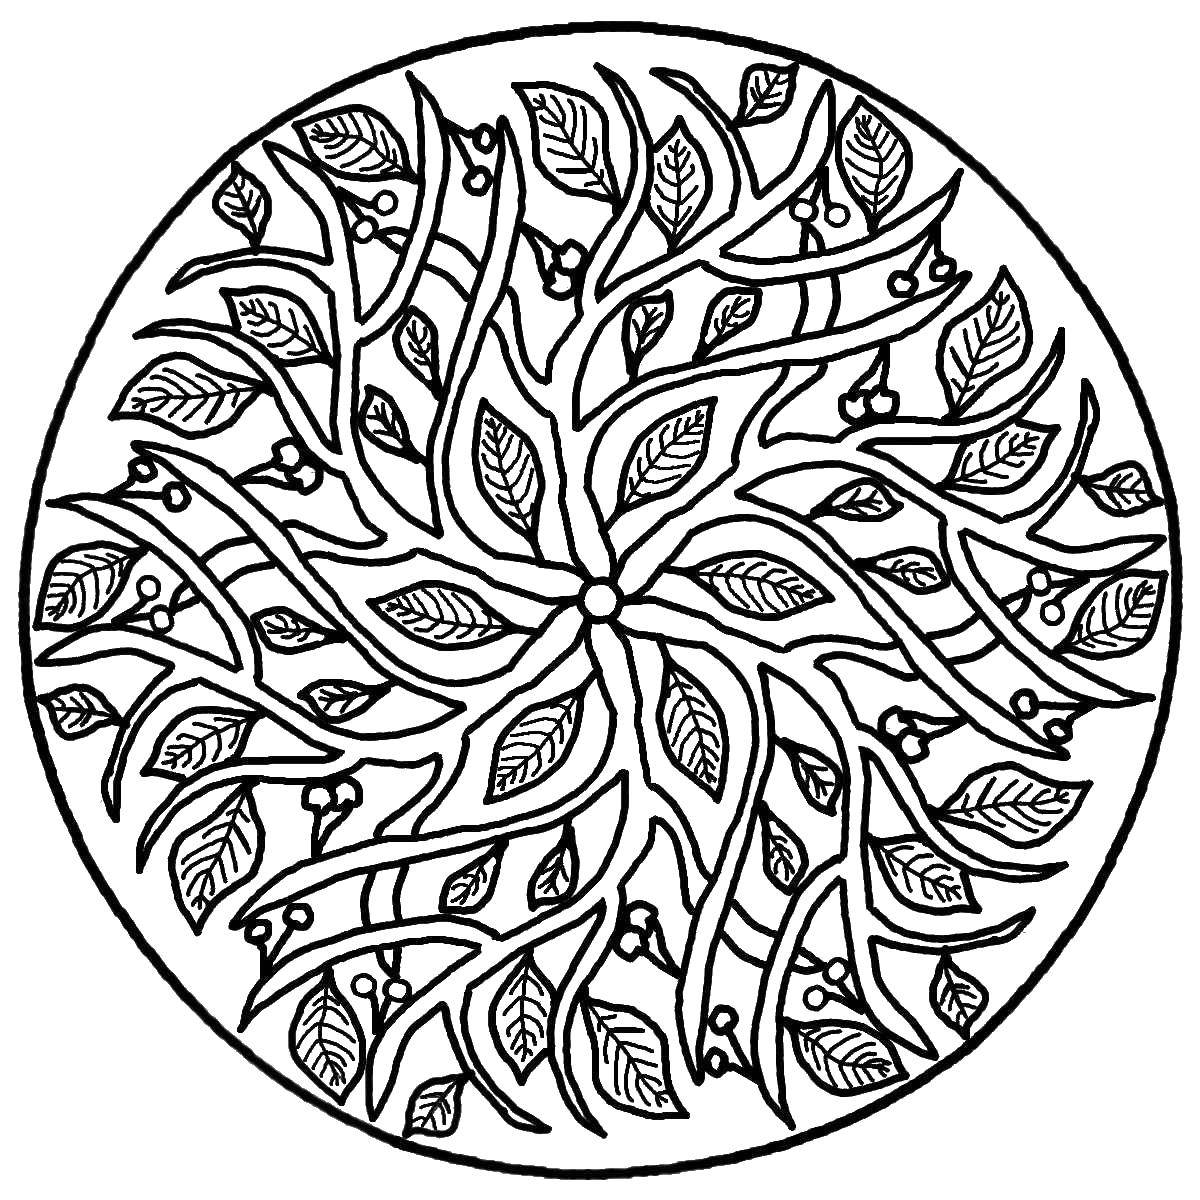 Coloring Floral pattern in a circle. Category patterns. Tags:  Patterns, flower.